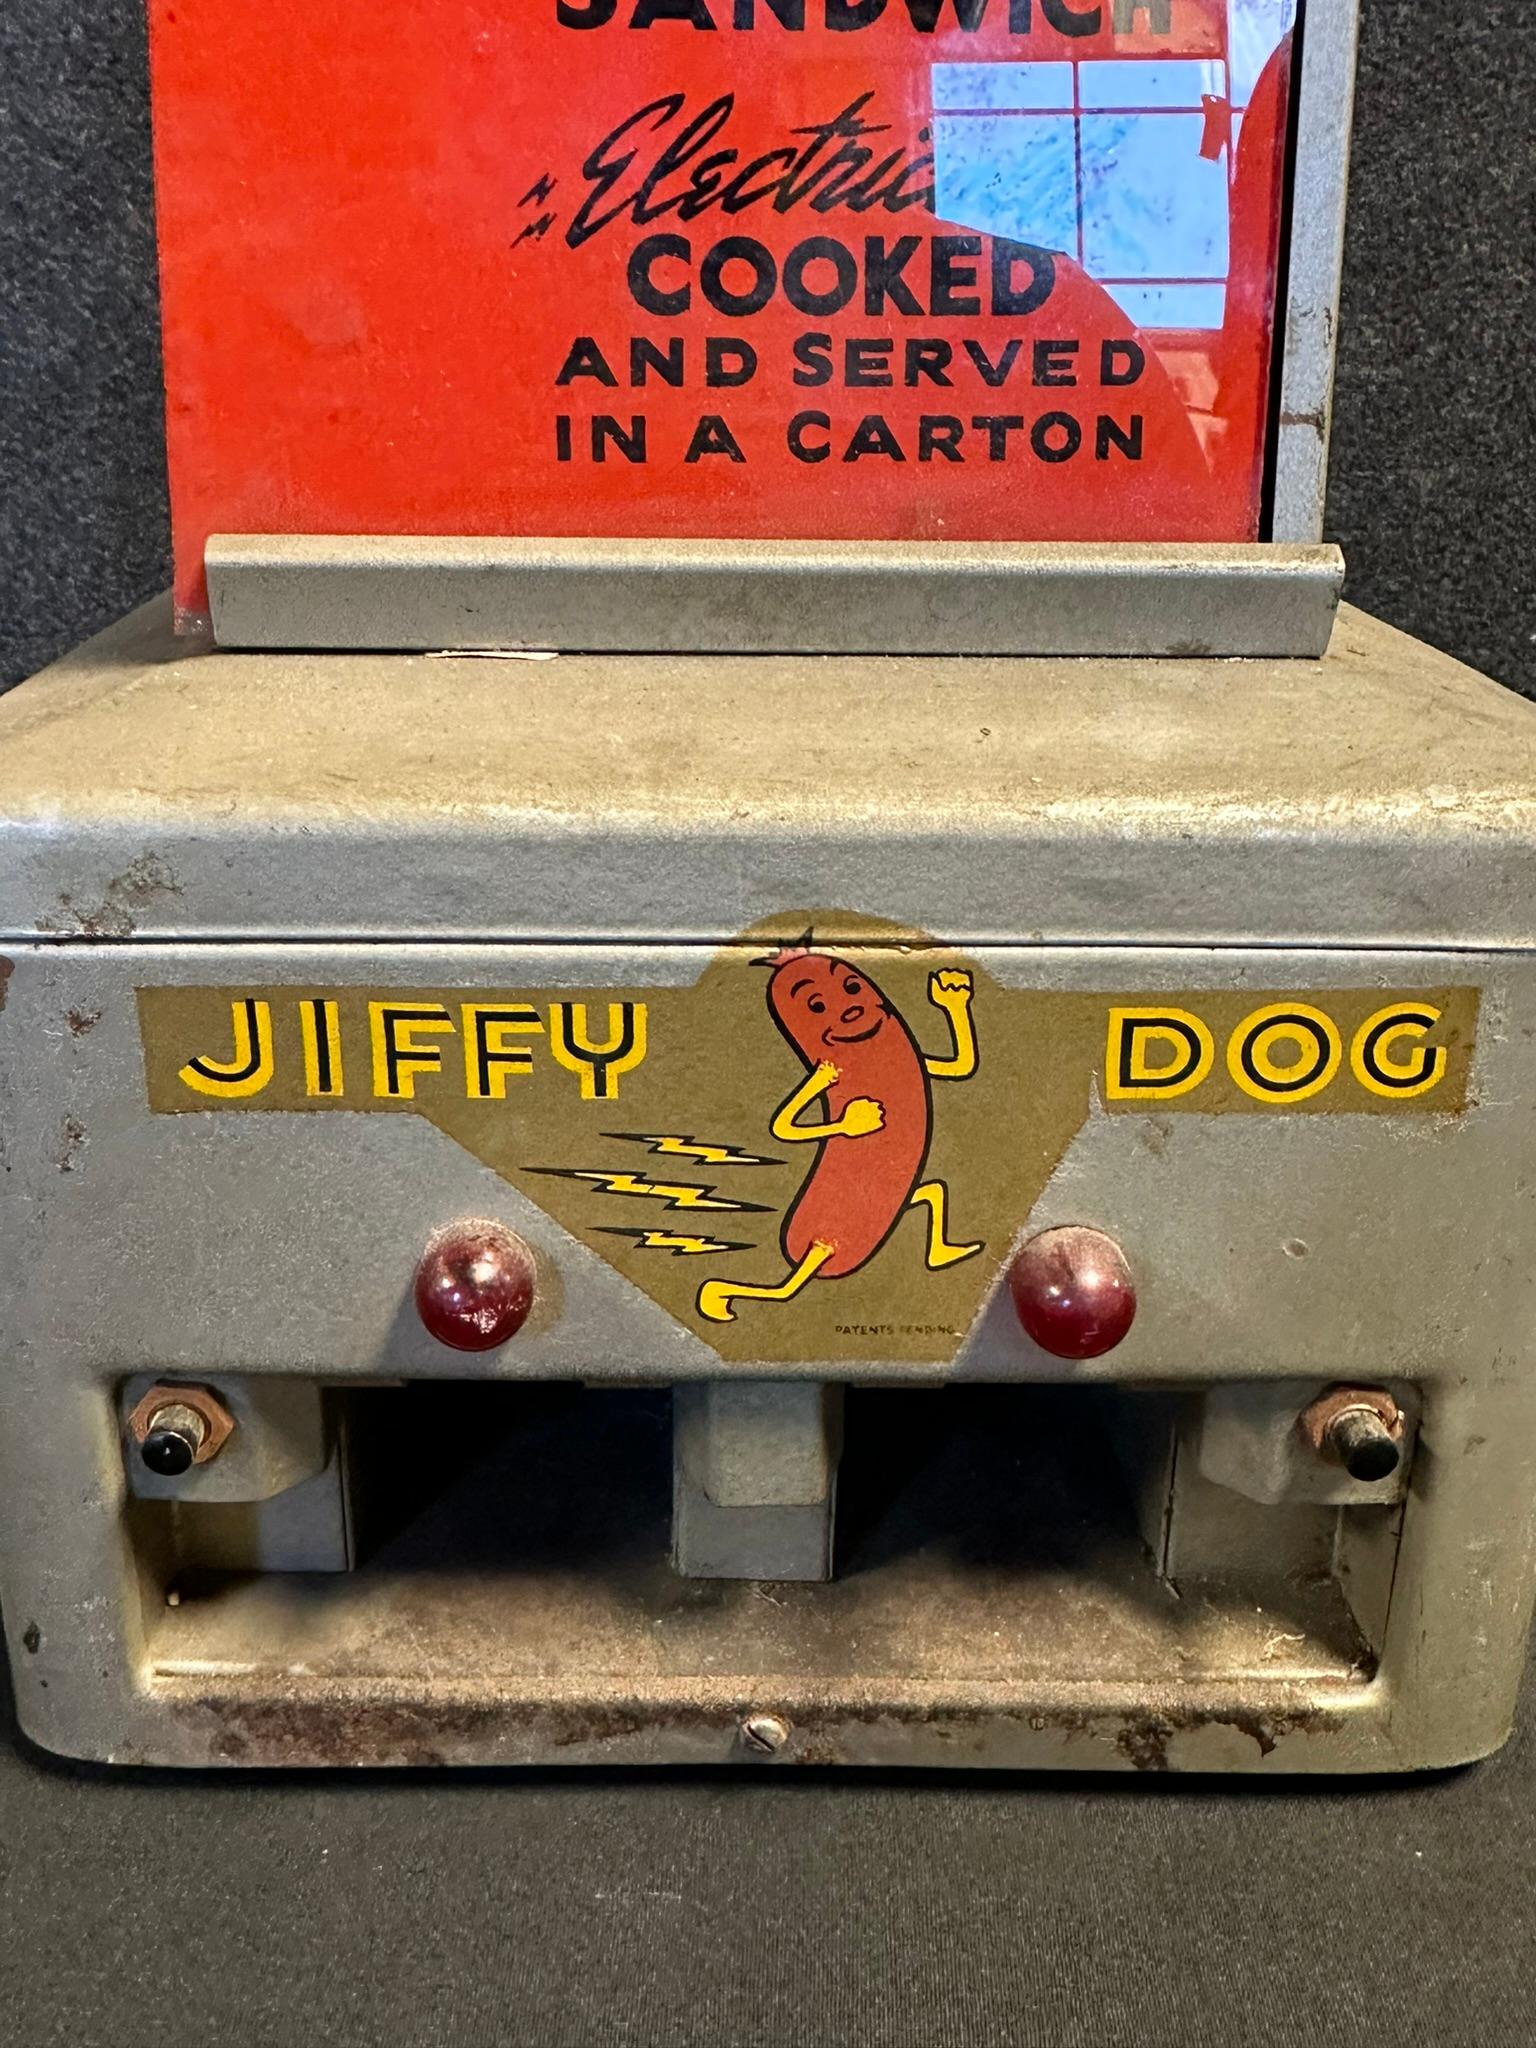 1930s Jiffy Hot Dog Sandwich Electric Cooker Warmer General Store Display w/ Incredible Graphics